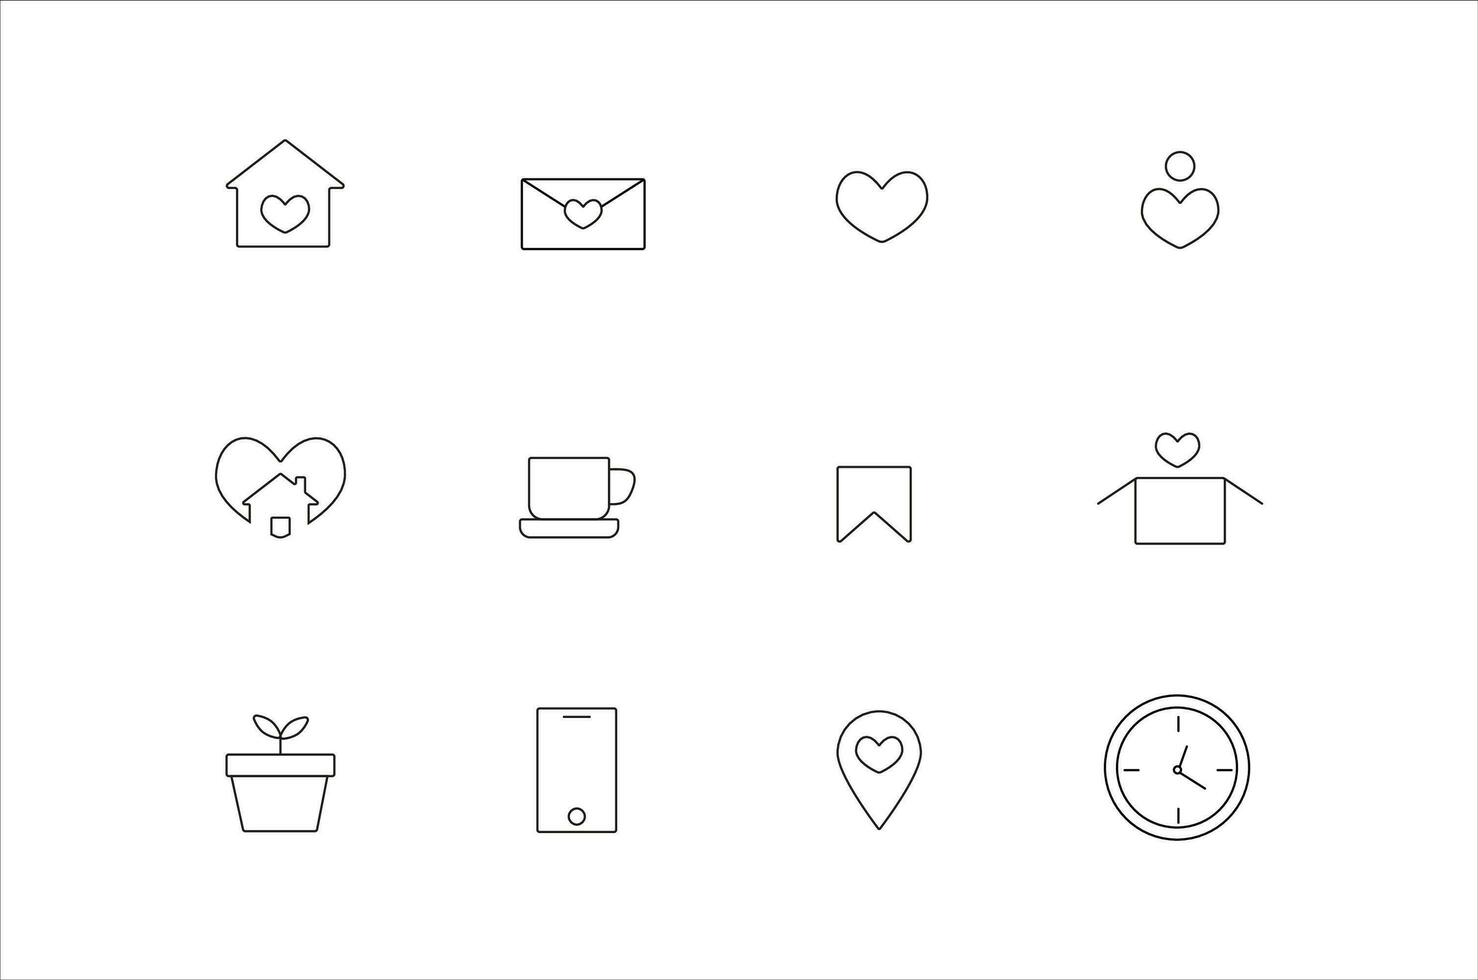 Linear art set of icons for home social networking, heart cute vector